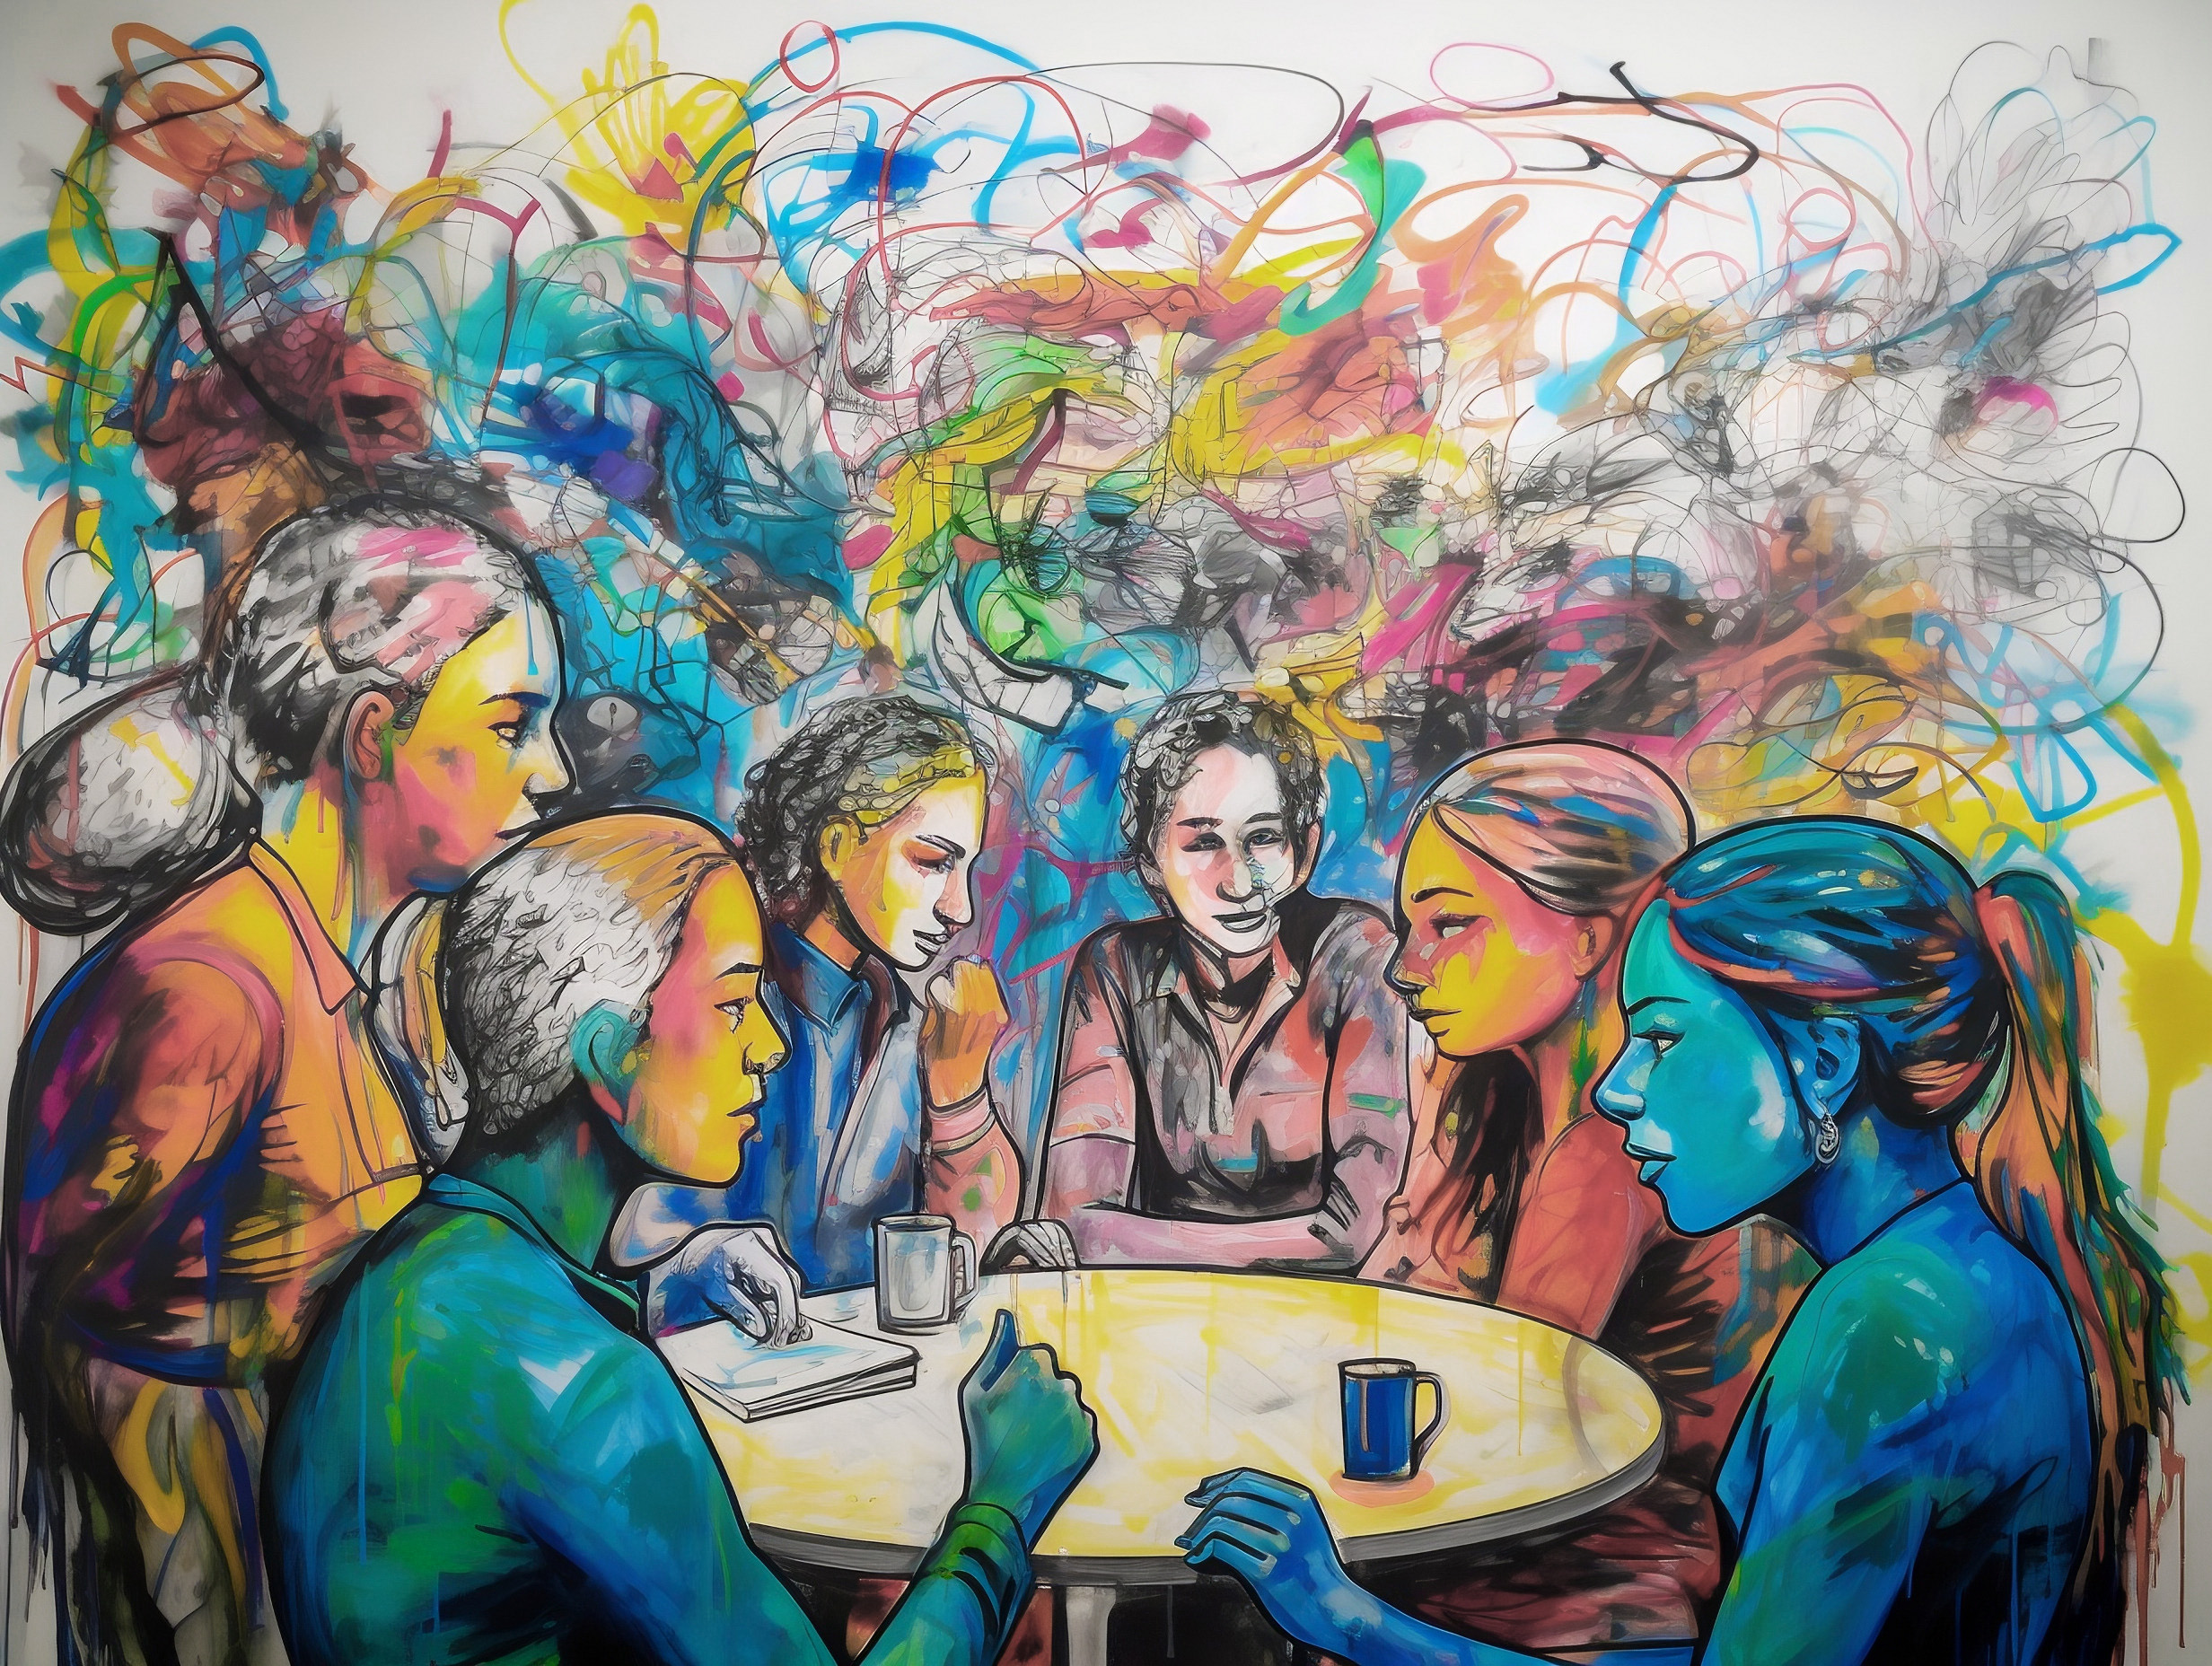 An expressionistic illustration of people sitting around an table discussing ideas.